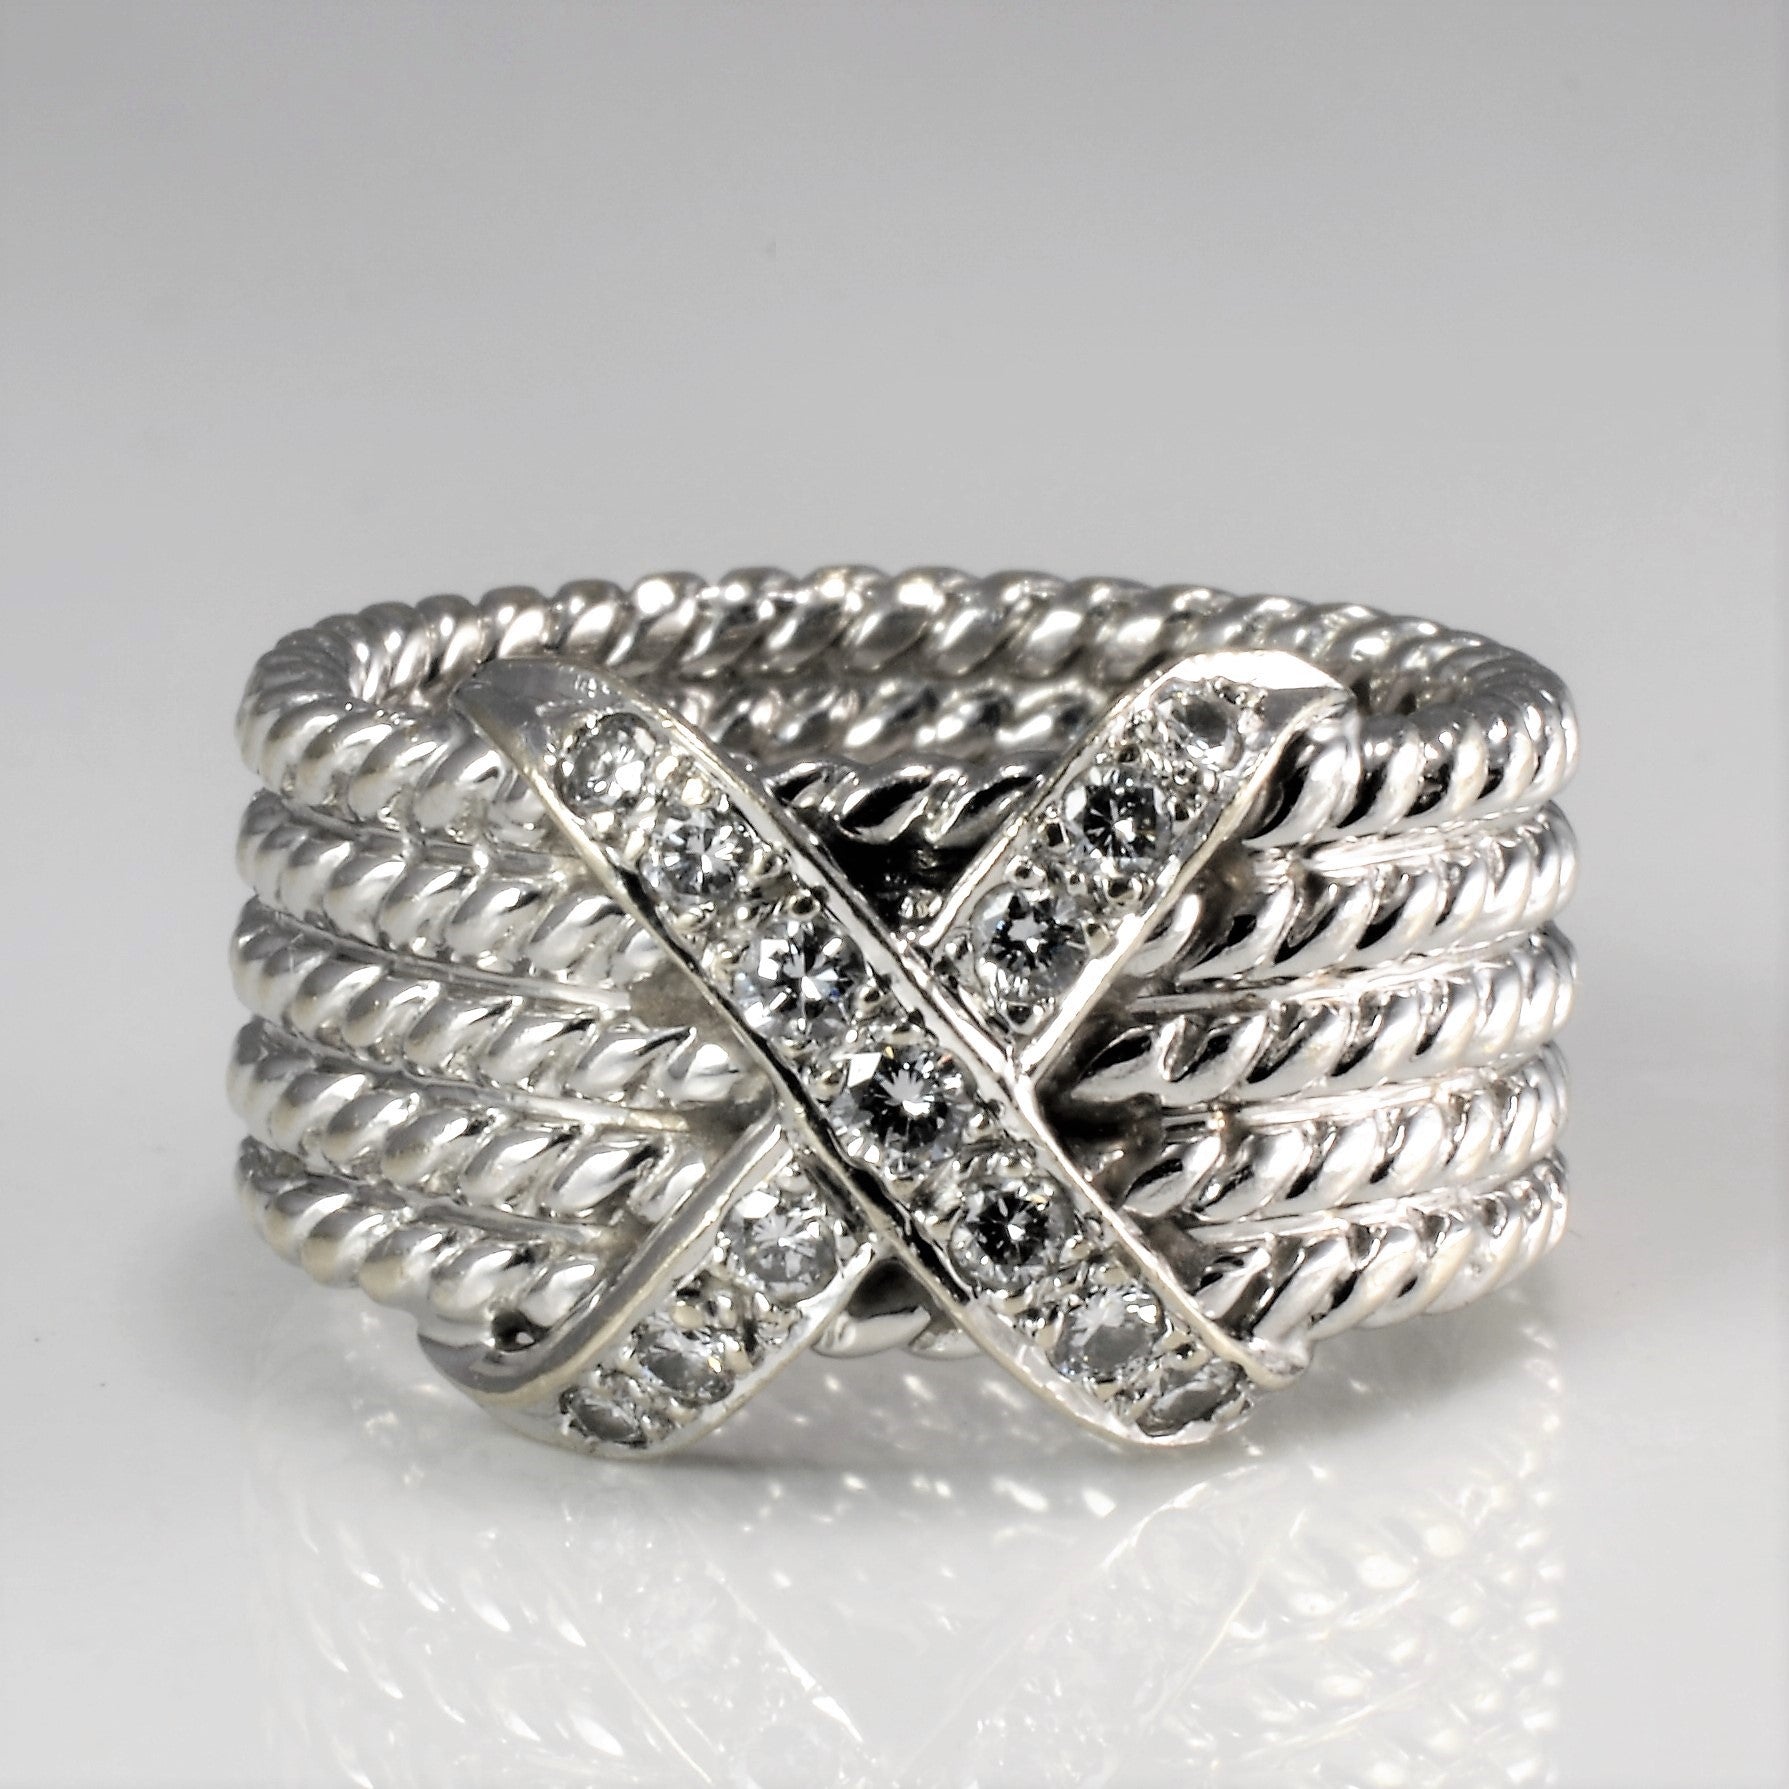 Textured Crossover Diamond Wide Band Ring | 0.20 ctw, SZ 6.25 |